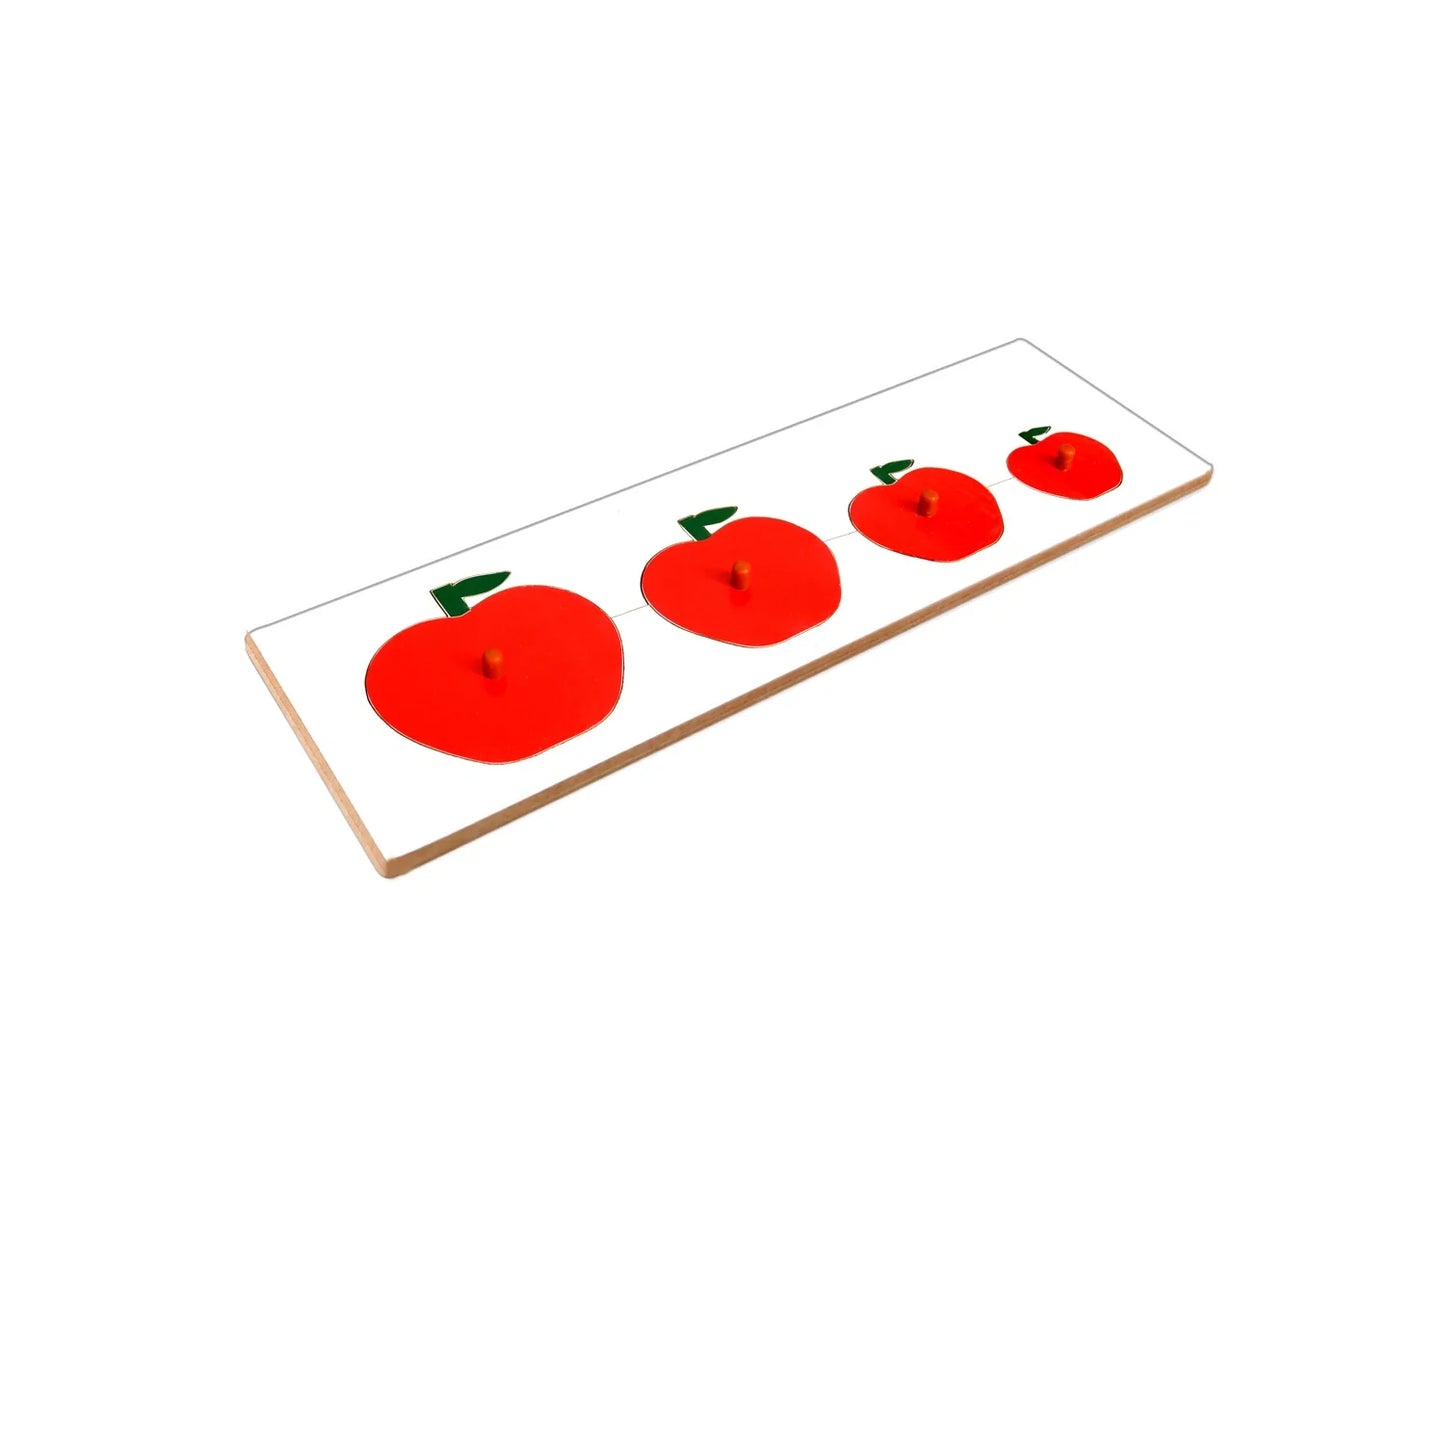 Montessori Size Variation Inset Learning Board - Apple